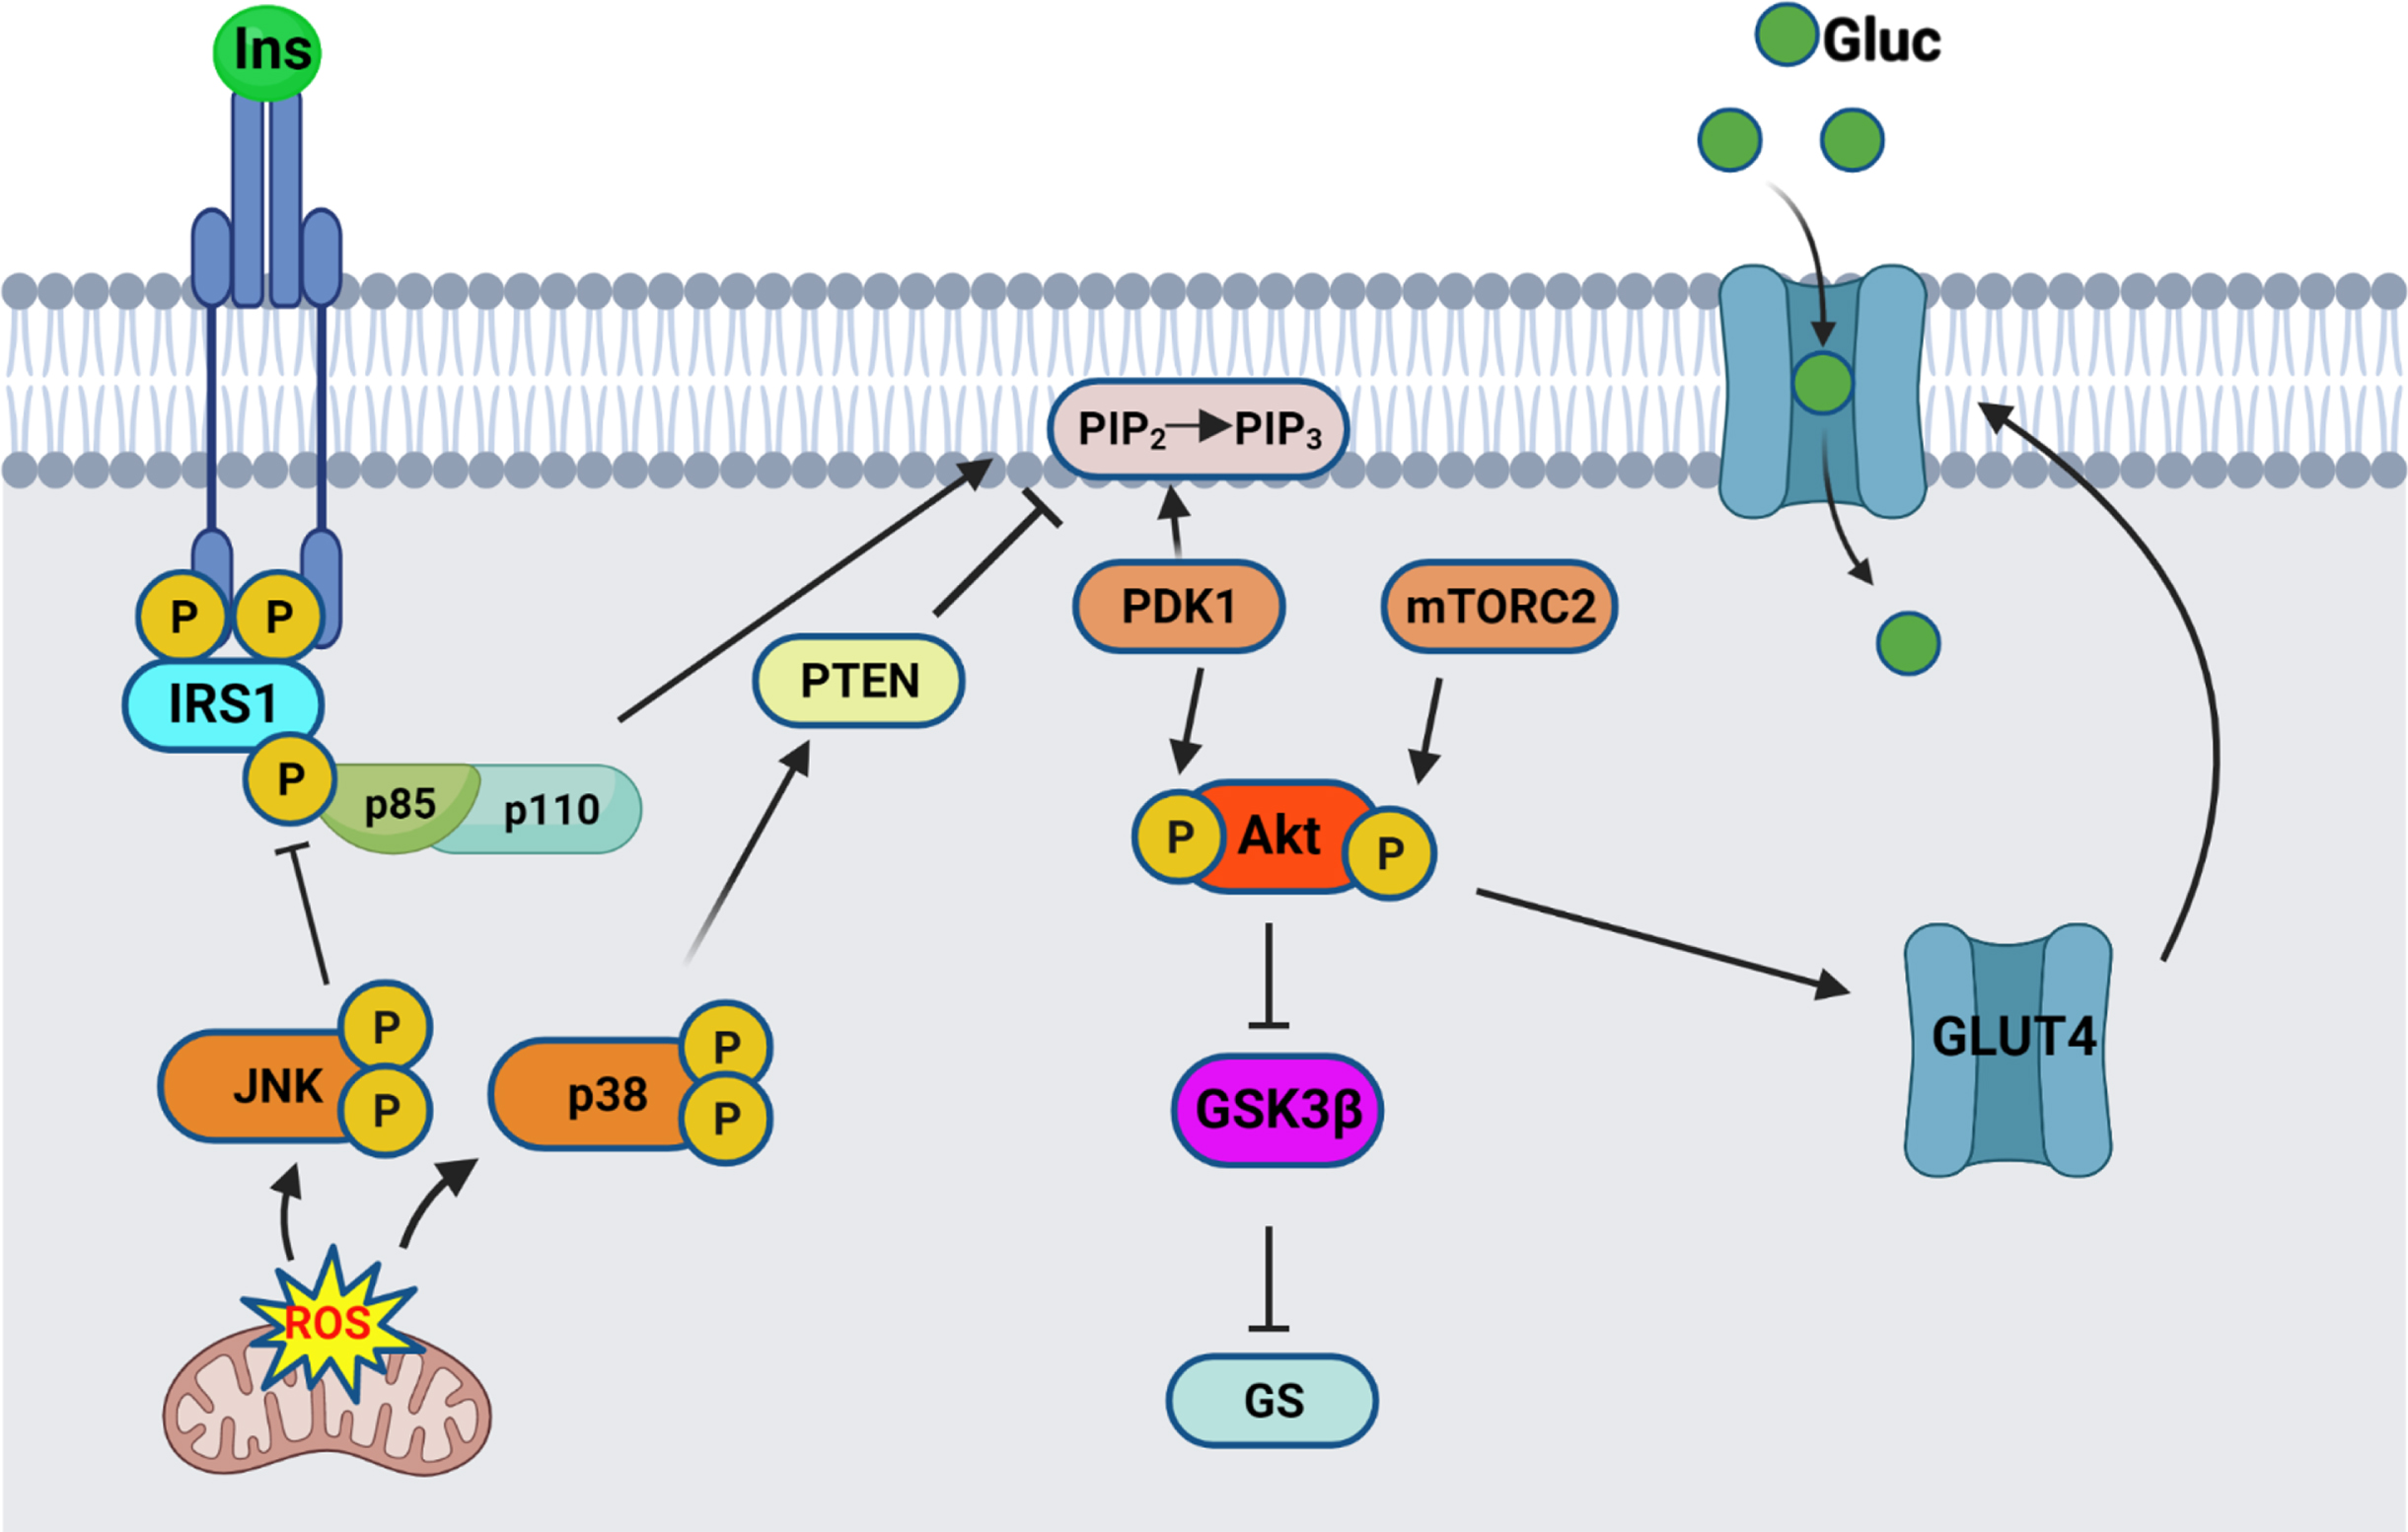 Insulin signaling pathway schematic. Insulin binds to the extracellular IR domain, inducing autophosphorylation of the intracellular domain, leading to recruitment and phosphorylation of IRS1. Regulatory subunit of PI3K, p85α, gets recruited to the bound IRS1, and activates the catalytic subunit, p110. Active PI3K converts PIP2 into PIP3 thereby recruiting PDK1 and Akt, resulting in phosphorylation of Akt on Thr308. Full activation of Akt occurs after phosphorylation on Ser473 by mTORC2. Active Akt inhibits GSK3β by Ser9 phosphorylation, therefore relieving the inhibition on Glycogen synthase (GS). Active Akt also leads to translocation of the glucose transporter GLUT4 from intracellular pools towards the membrane, where it allows glucose uptake. The stress response proteins, JNK and p38 MAPK, are activated by mitochondrial-generated ROS and result in inhibition of the insulin signaling pathway. Schematic created by Rabab Al-Lahham in BioRender.com